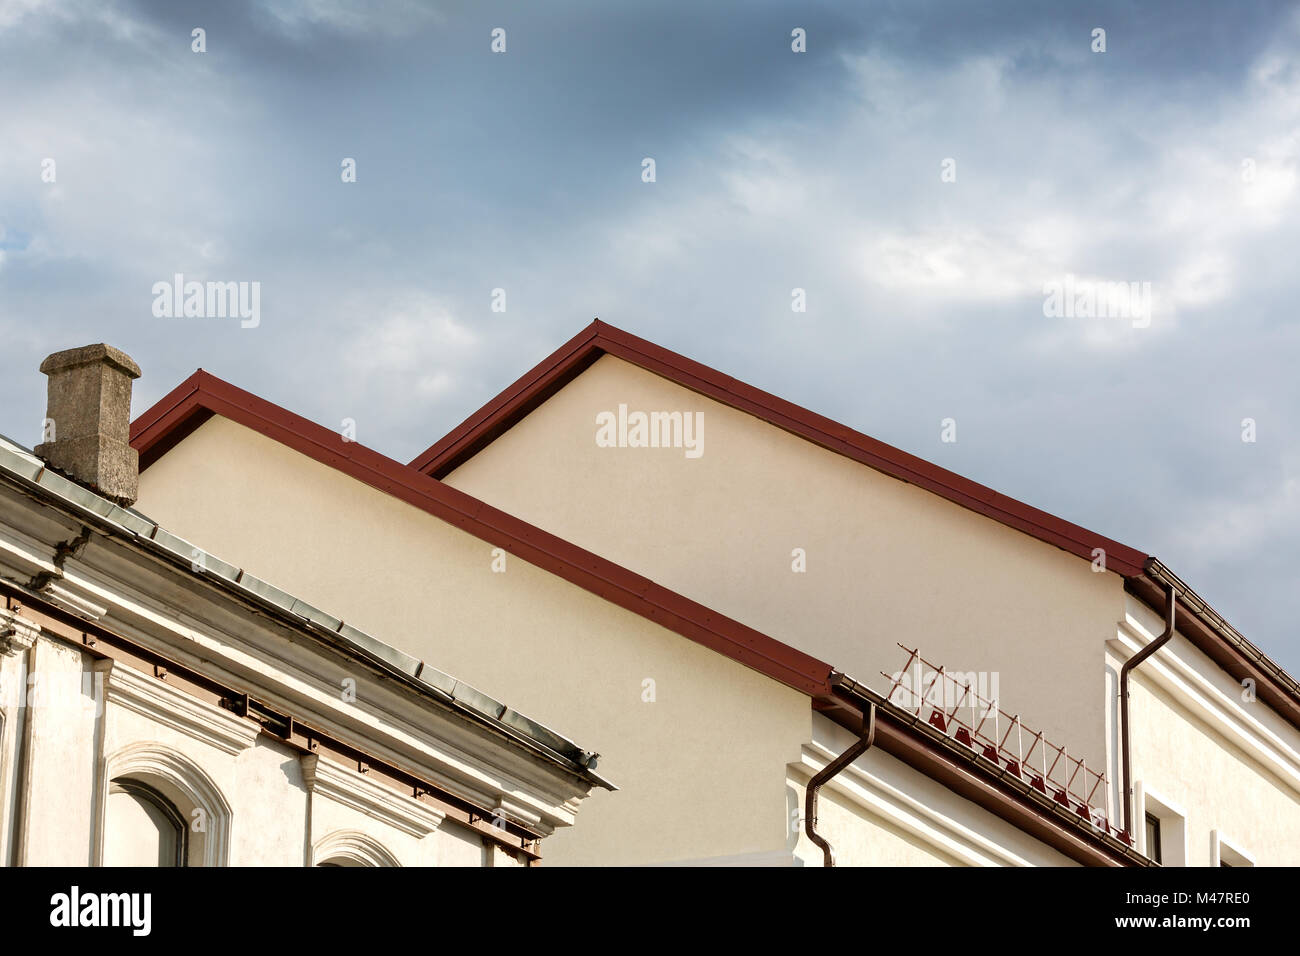 old houses with red roof under cloudy sky Stock Photo